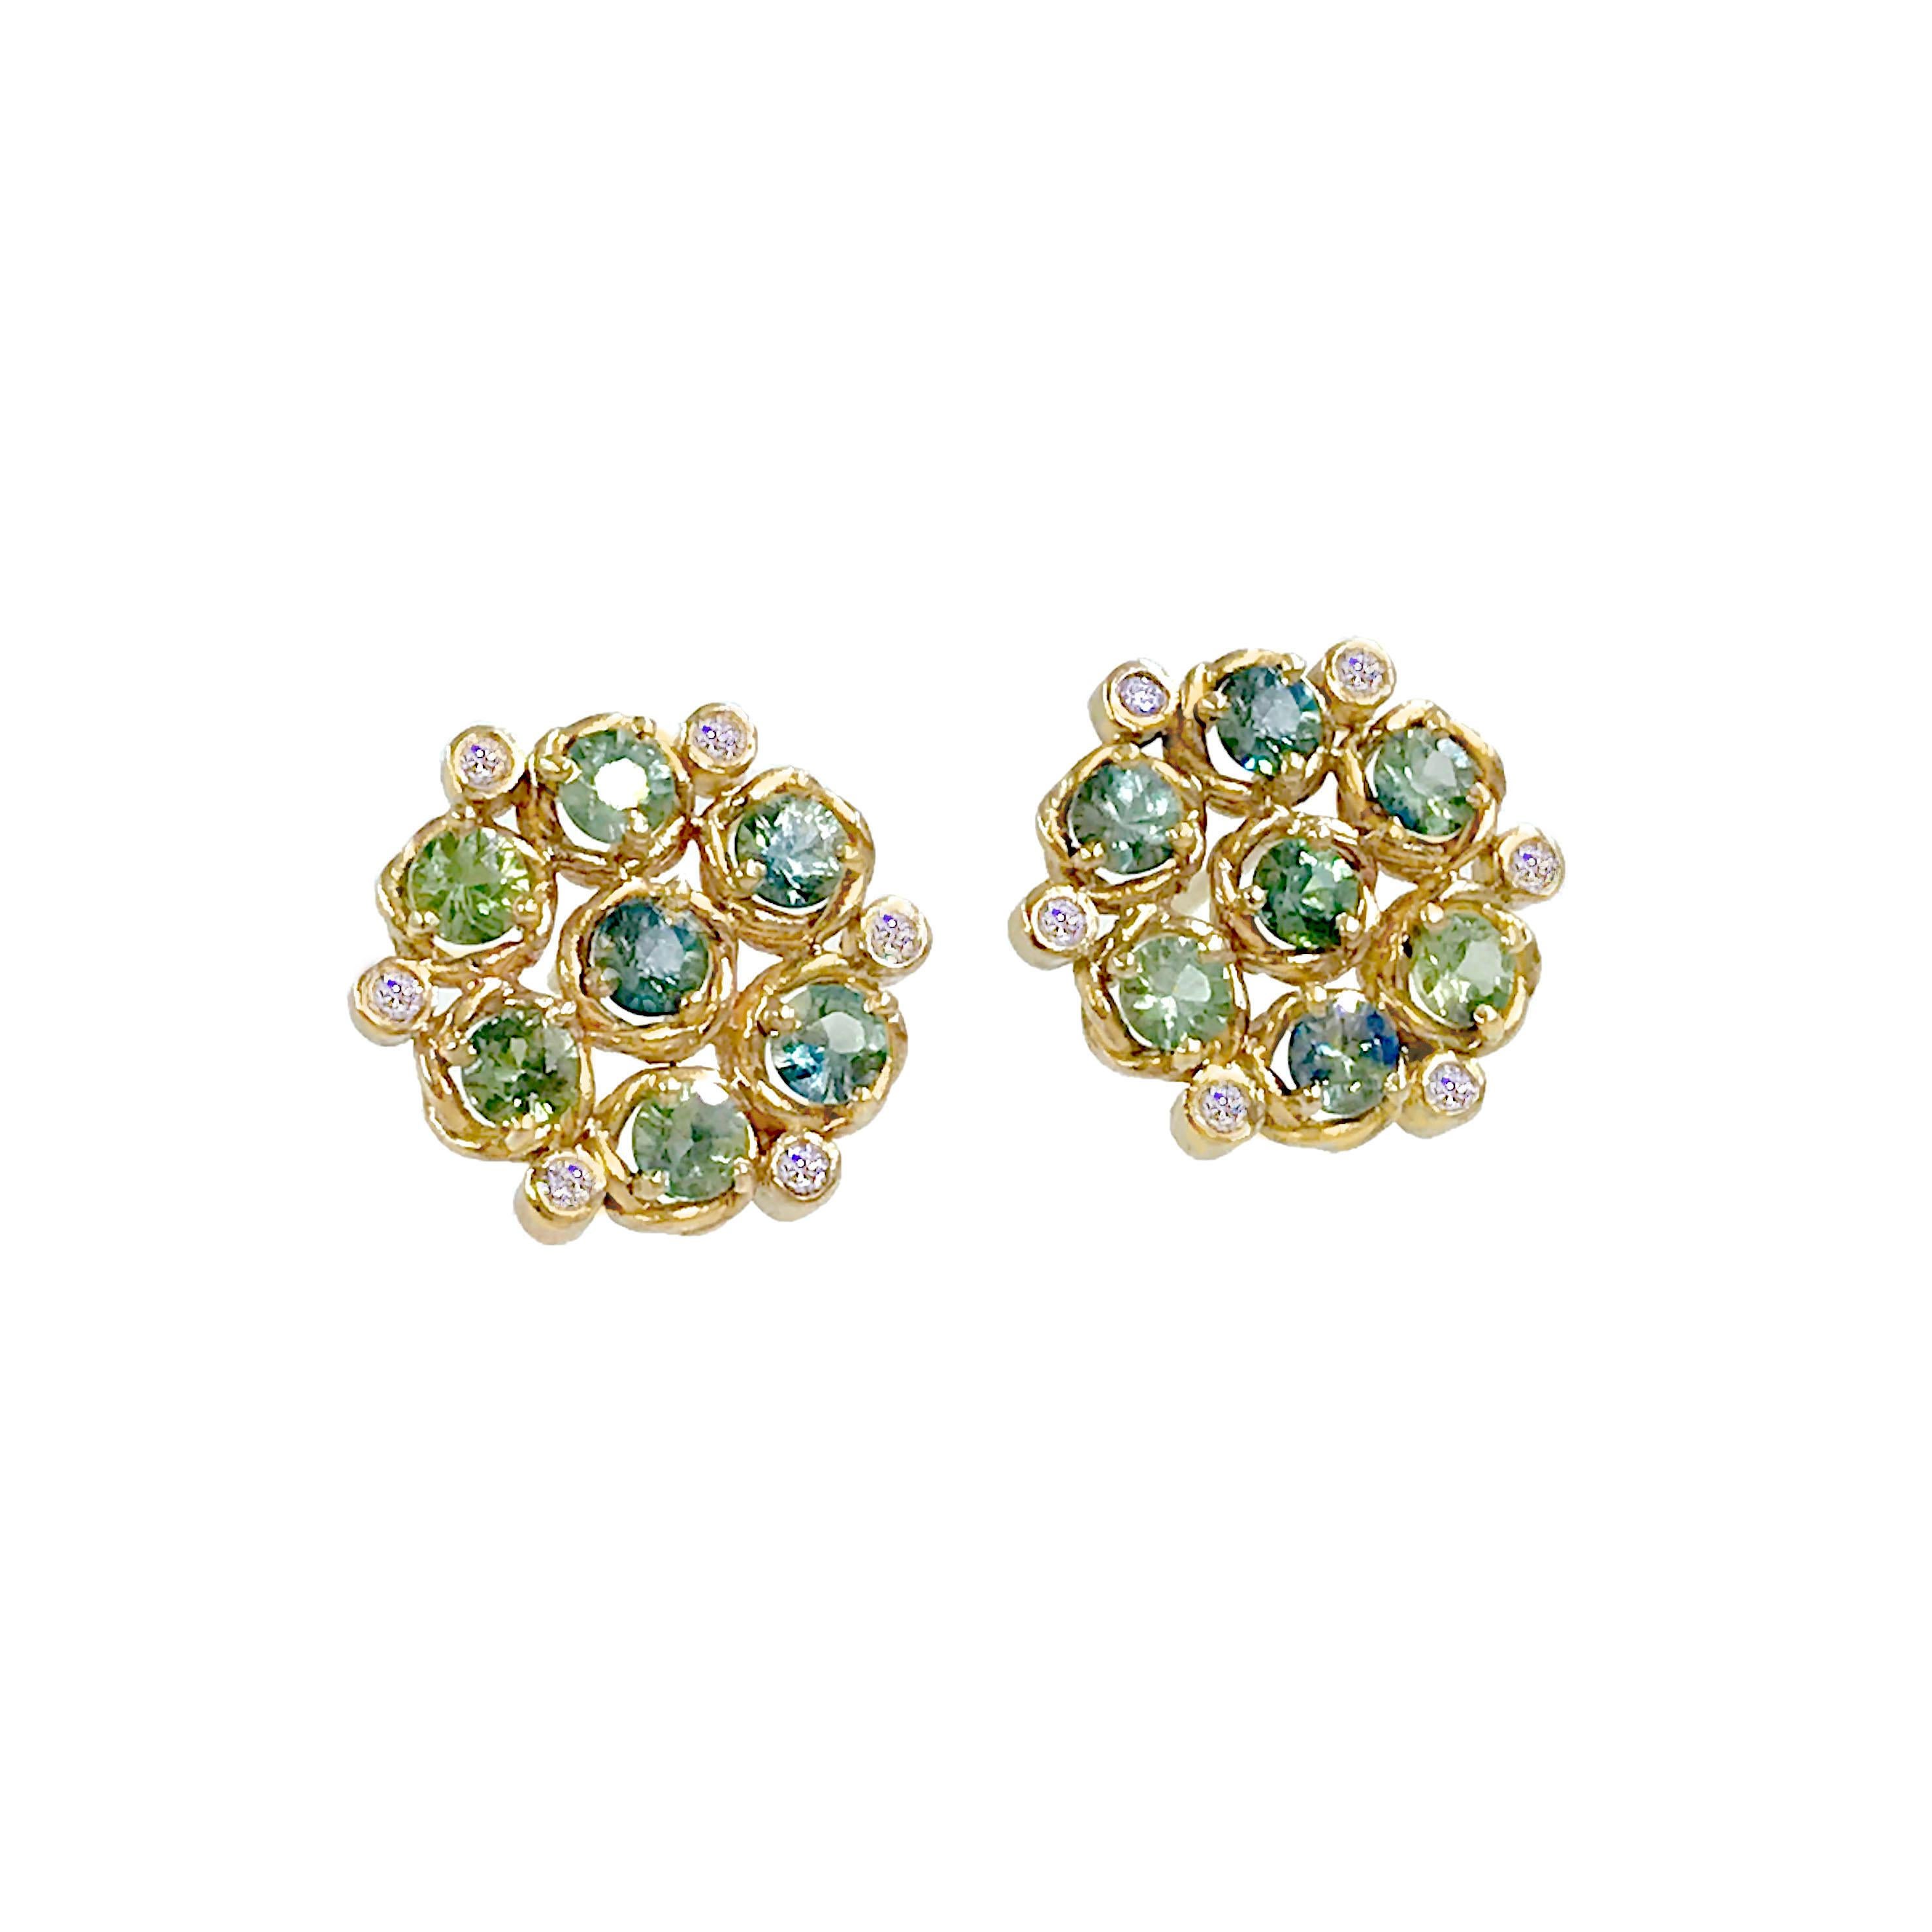 Aphrodite Green Sapphire Bouquet Cluster Studs – the perfect statement stud. Wear these on an evening out for some added sparkle, or simply elevate your everyday, classic stud. Post secure with friction ear backing. Made to order in 18k, in your